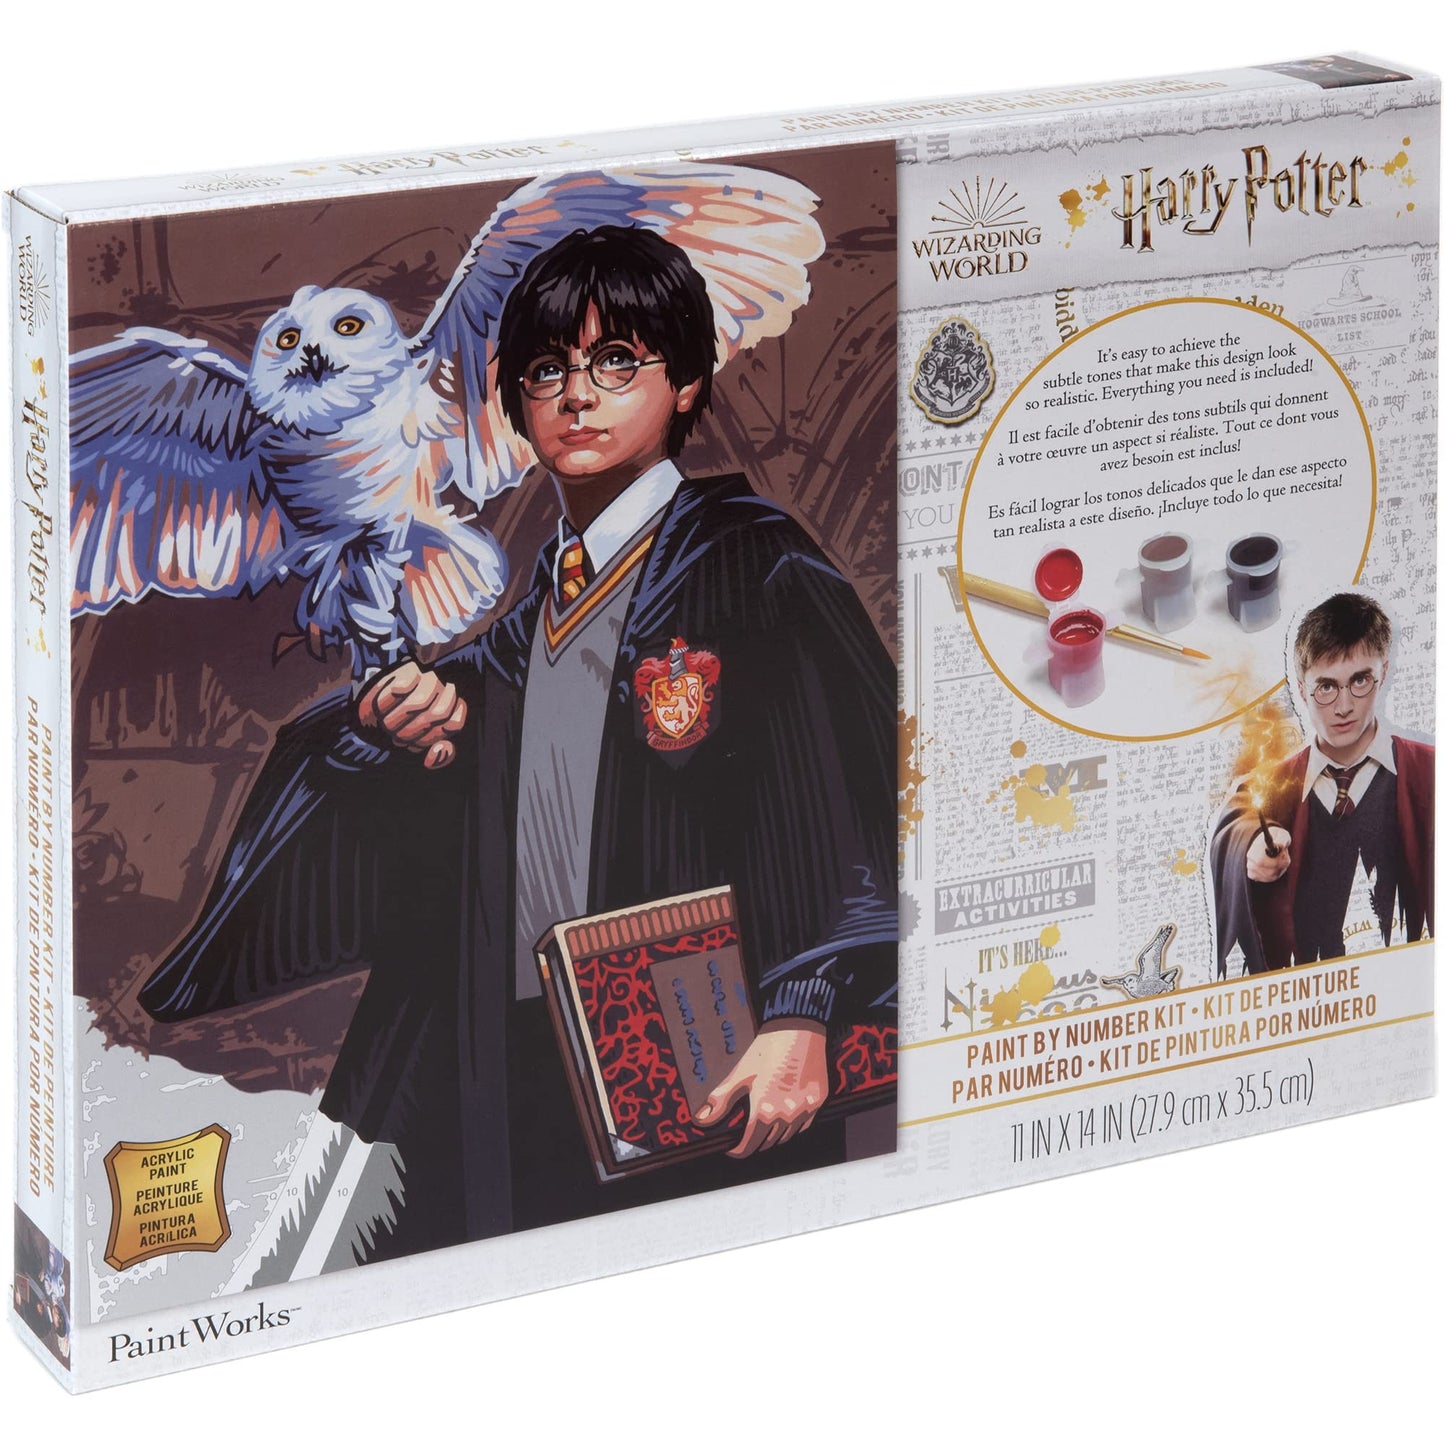 Dimensions PaintWorks Hedwig and Harry Potter Paint by Number Kit for  Adults and Kids, Finished Project 11 x 14, Multicolor 15 Piece